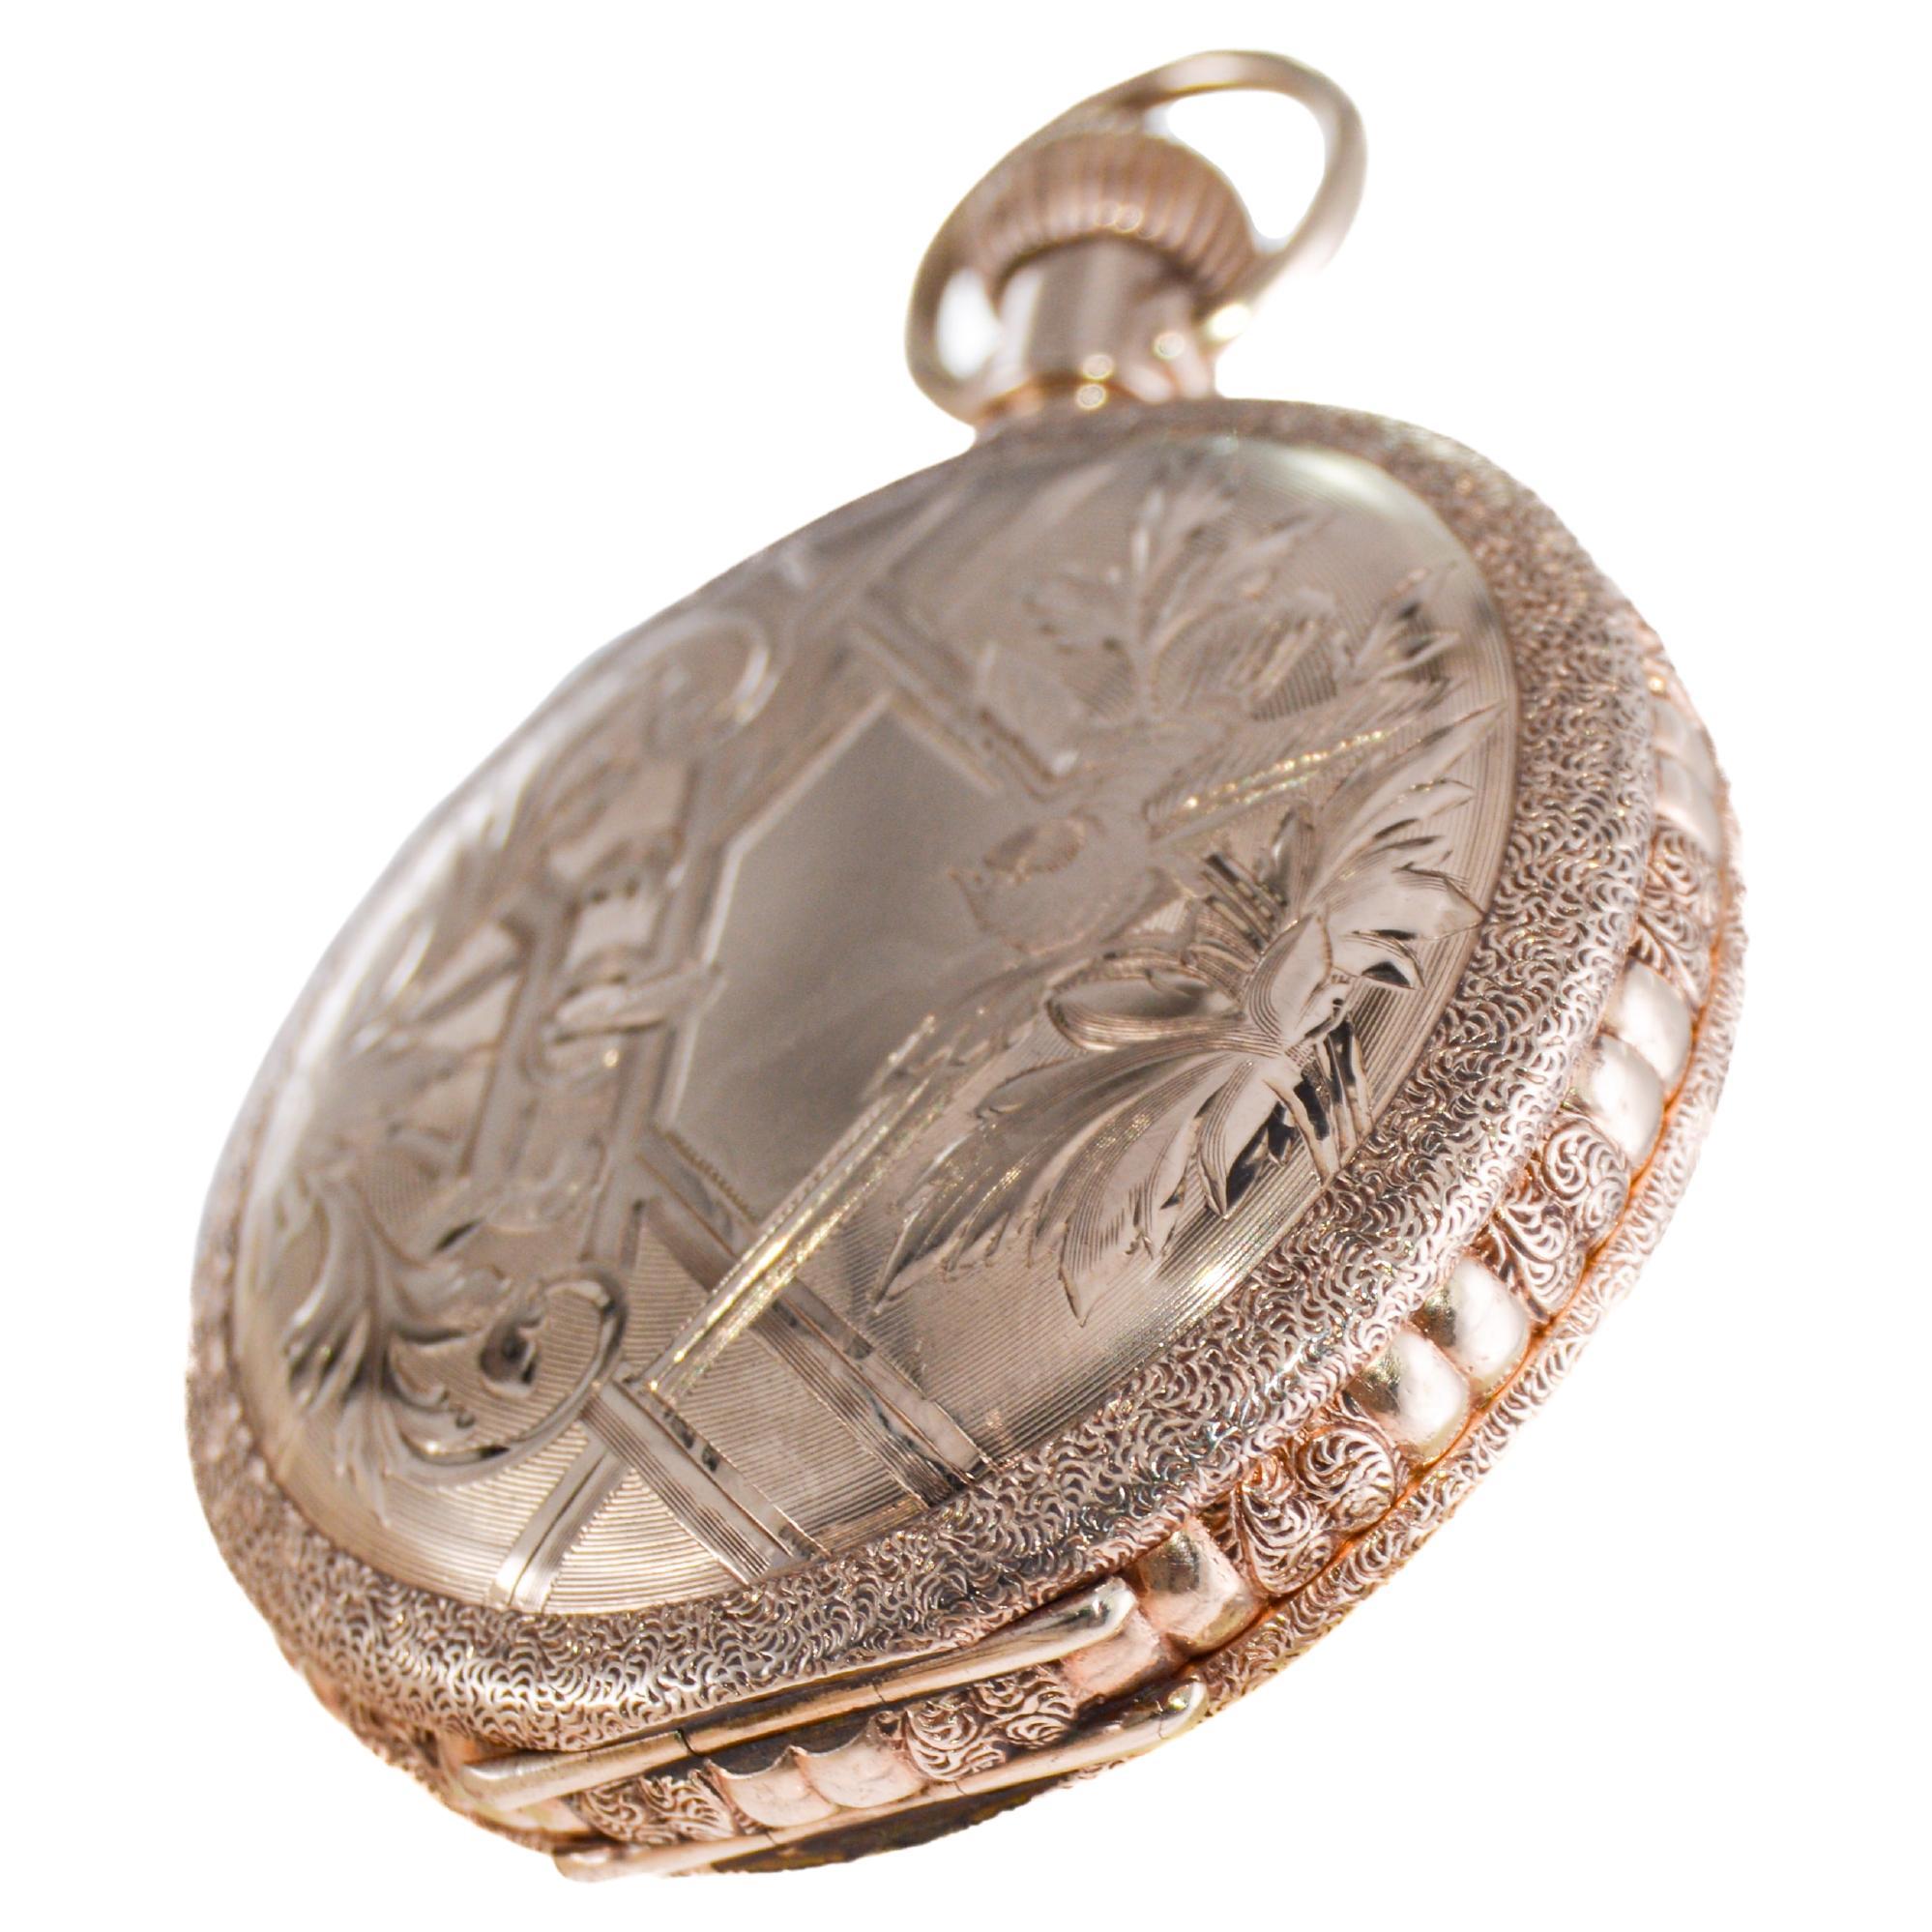 Elgin Gold Filled Pocket Watch From 1891 with Original Kiln Fired Enamel Dial  7